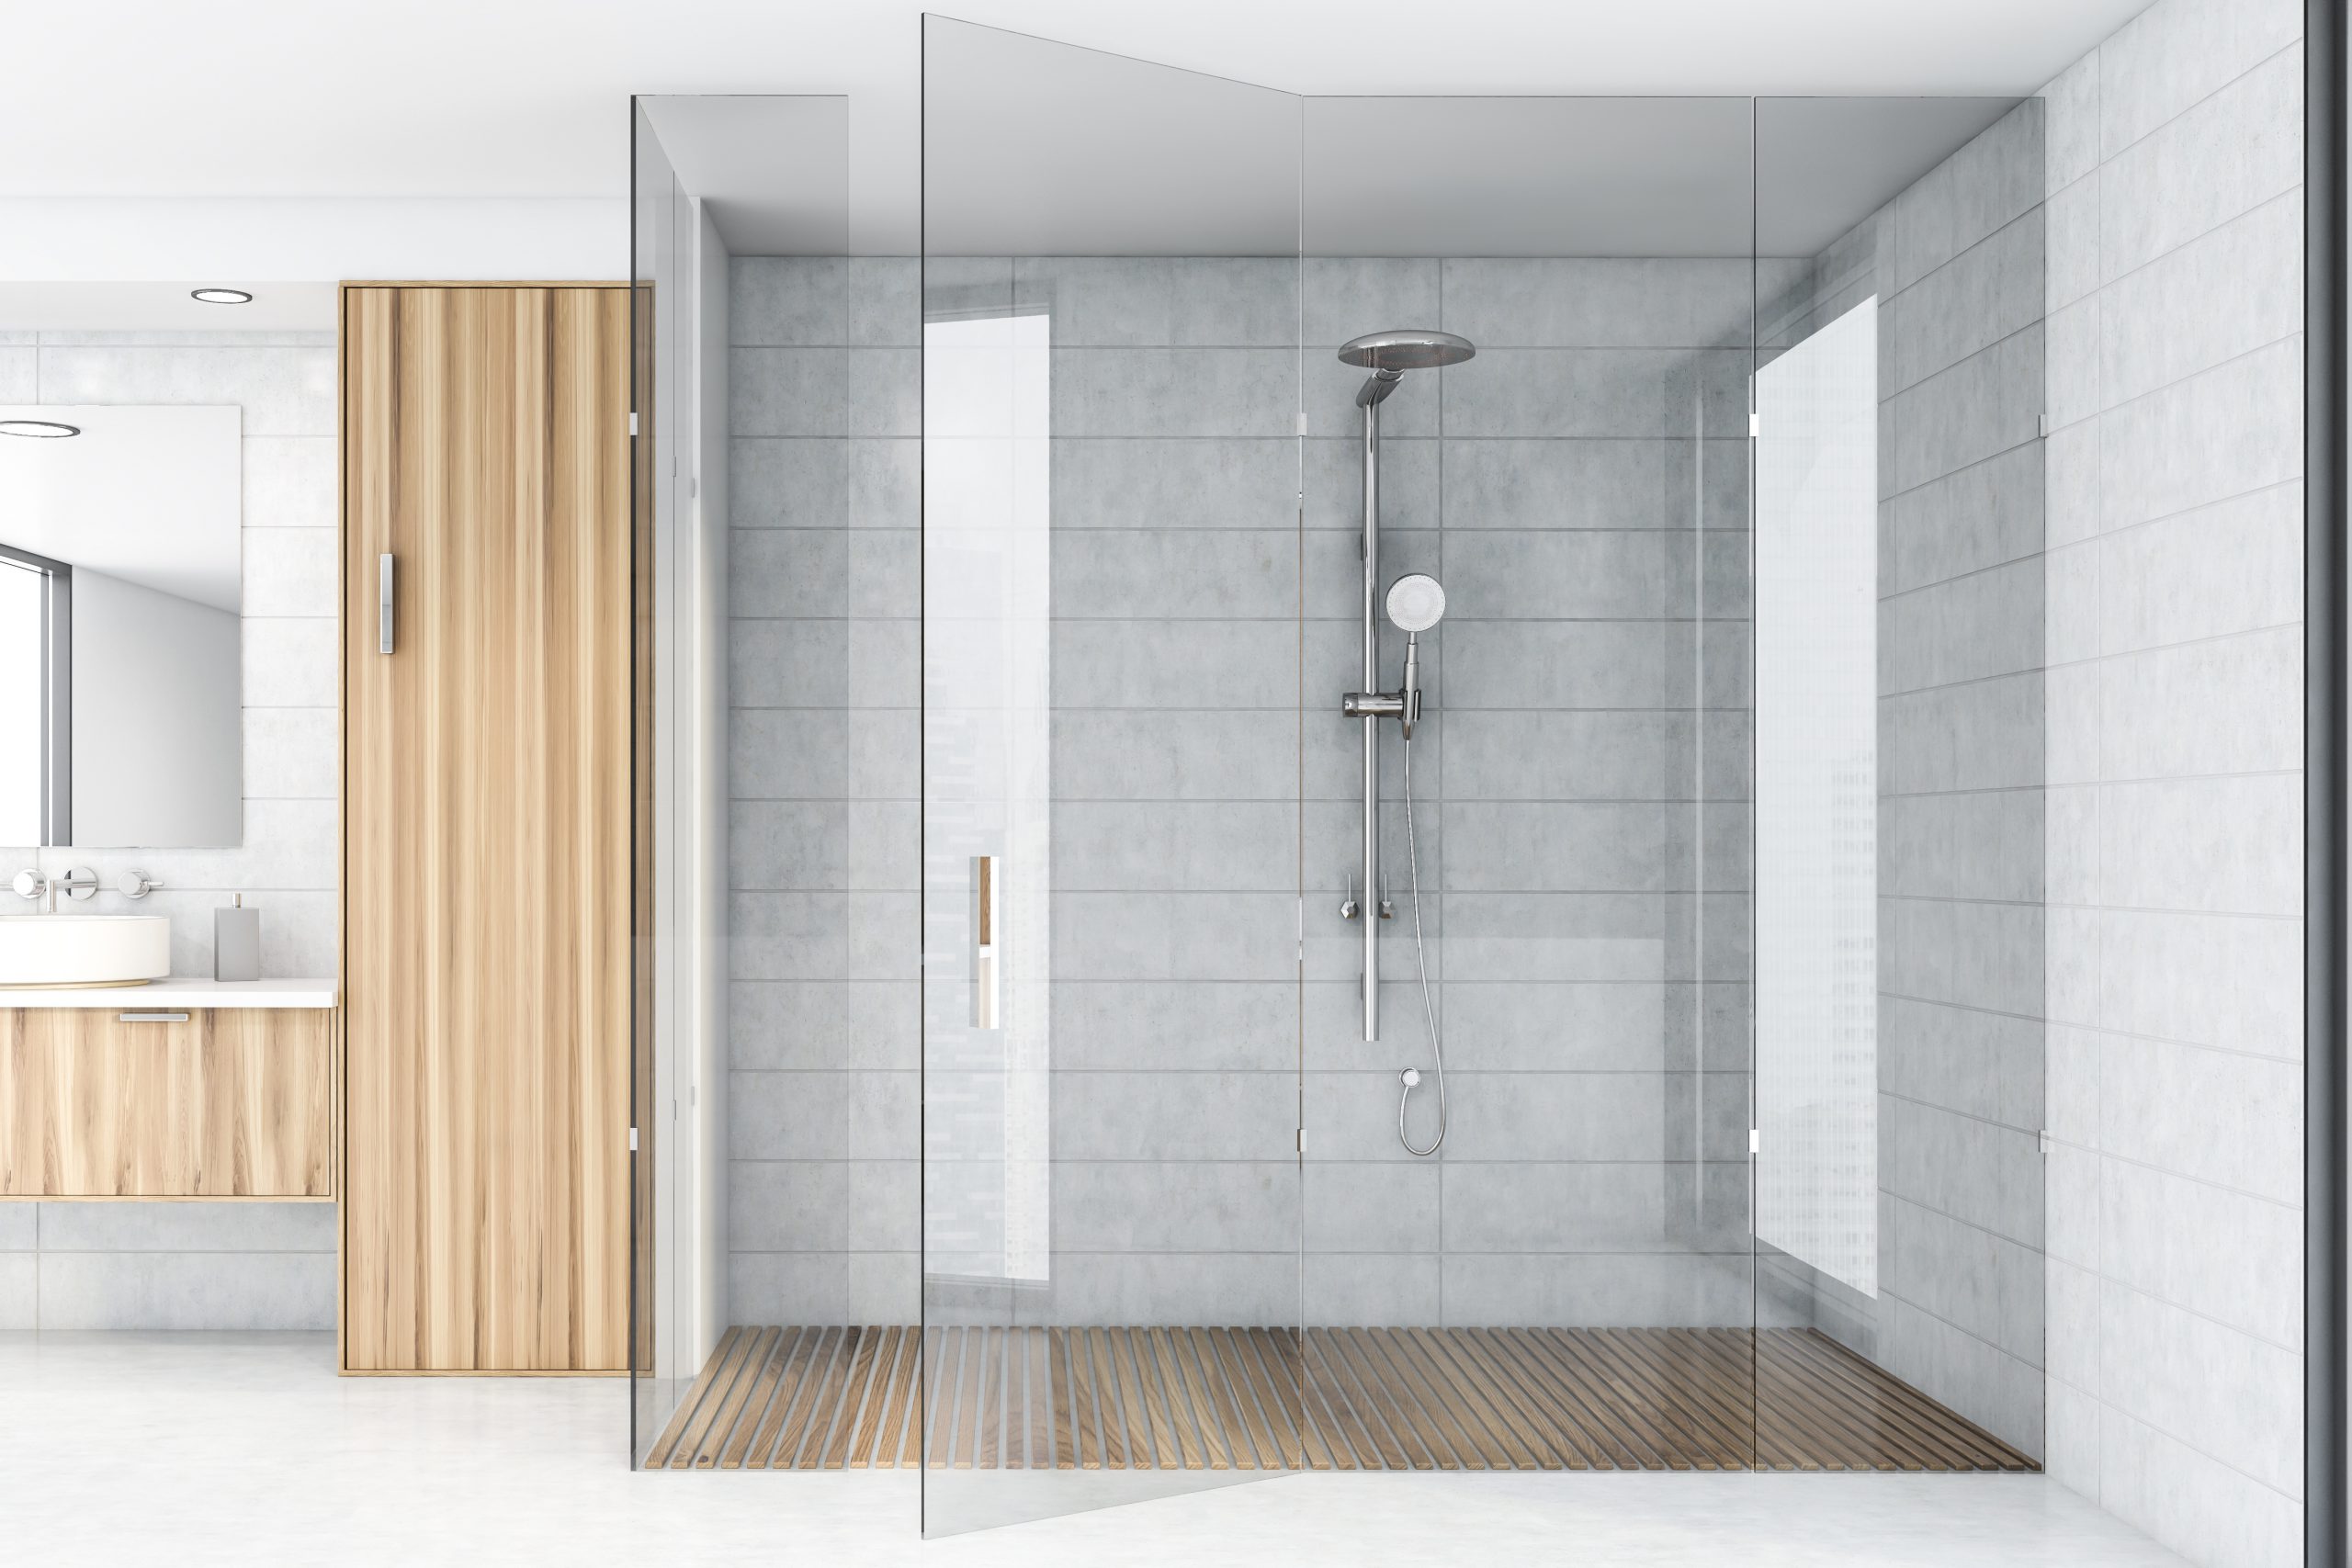 Grey tiles in combination with wooden tiles in a large bathroom equipped with walk-in glass shower doors